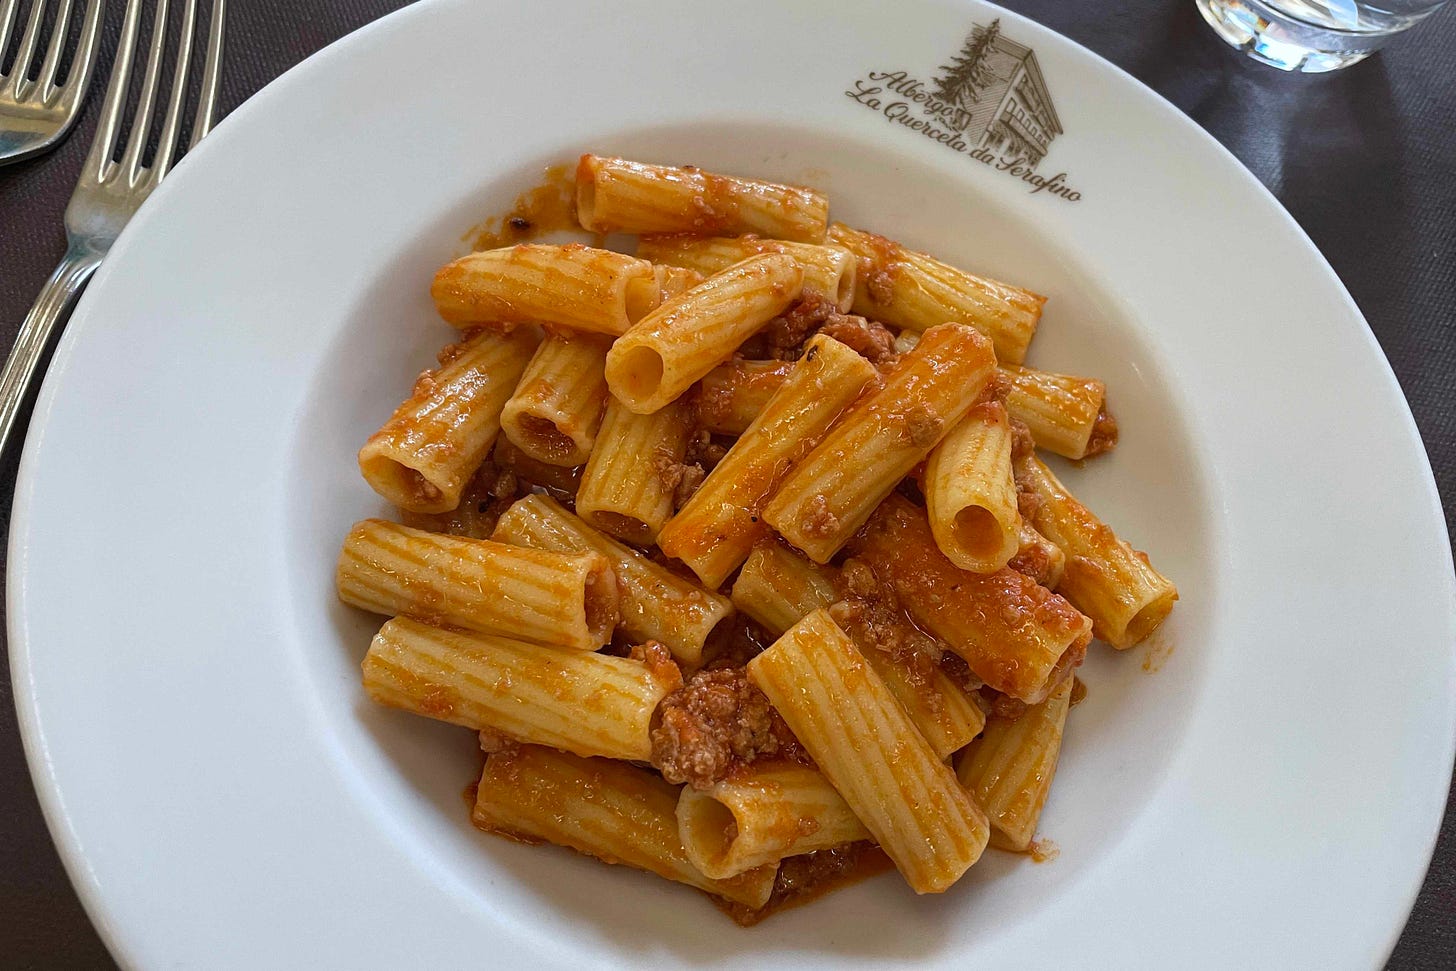 Bolognese sauce on rigatoni in a bowl